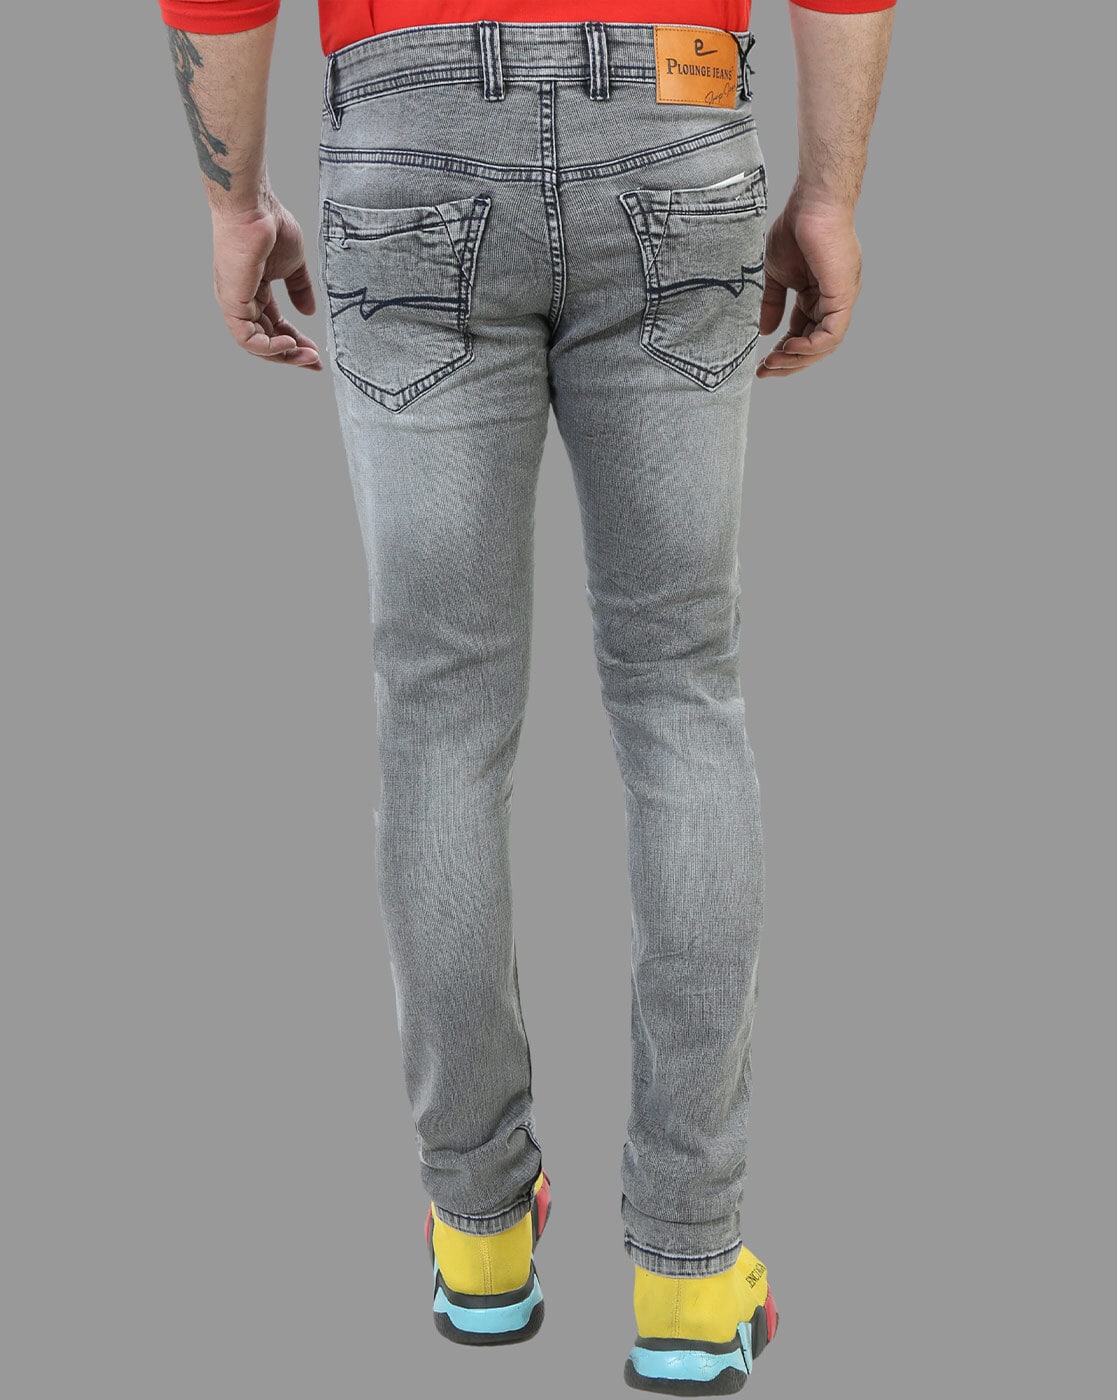 Luxury Autumn Mens Cotton Jeans Slim Fit, Elastic, Classic Style Business Jeans  Trousers For Men In Gray Color Direct Shipment From Thefashionbag8, $29.9 |  DHgate.Com